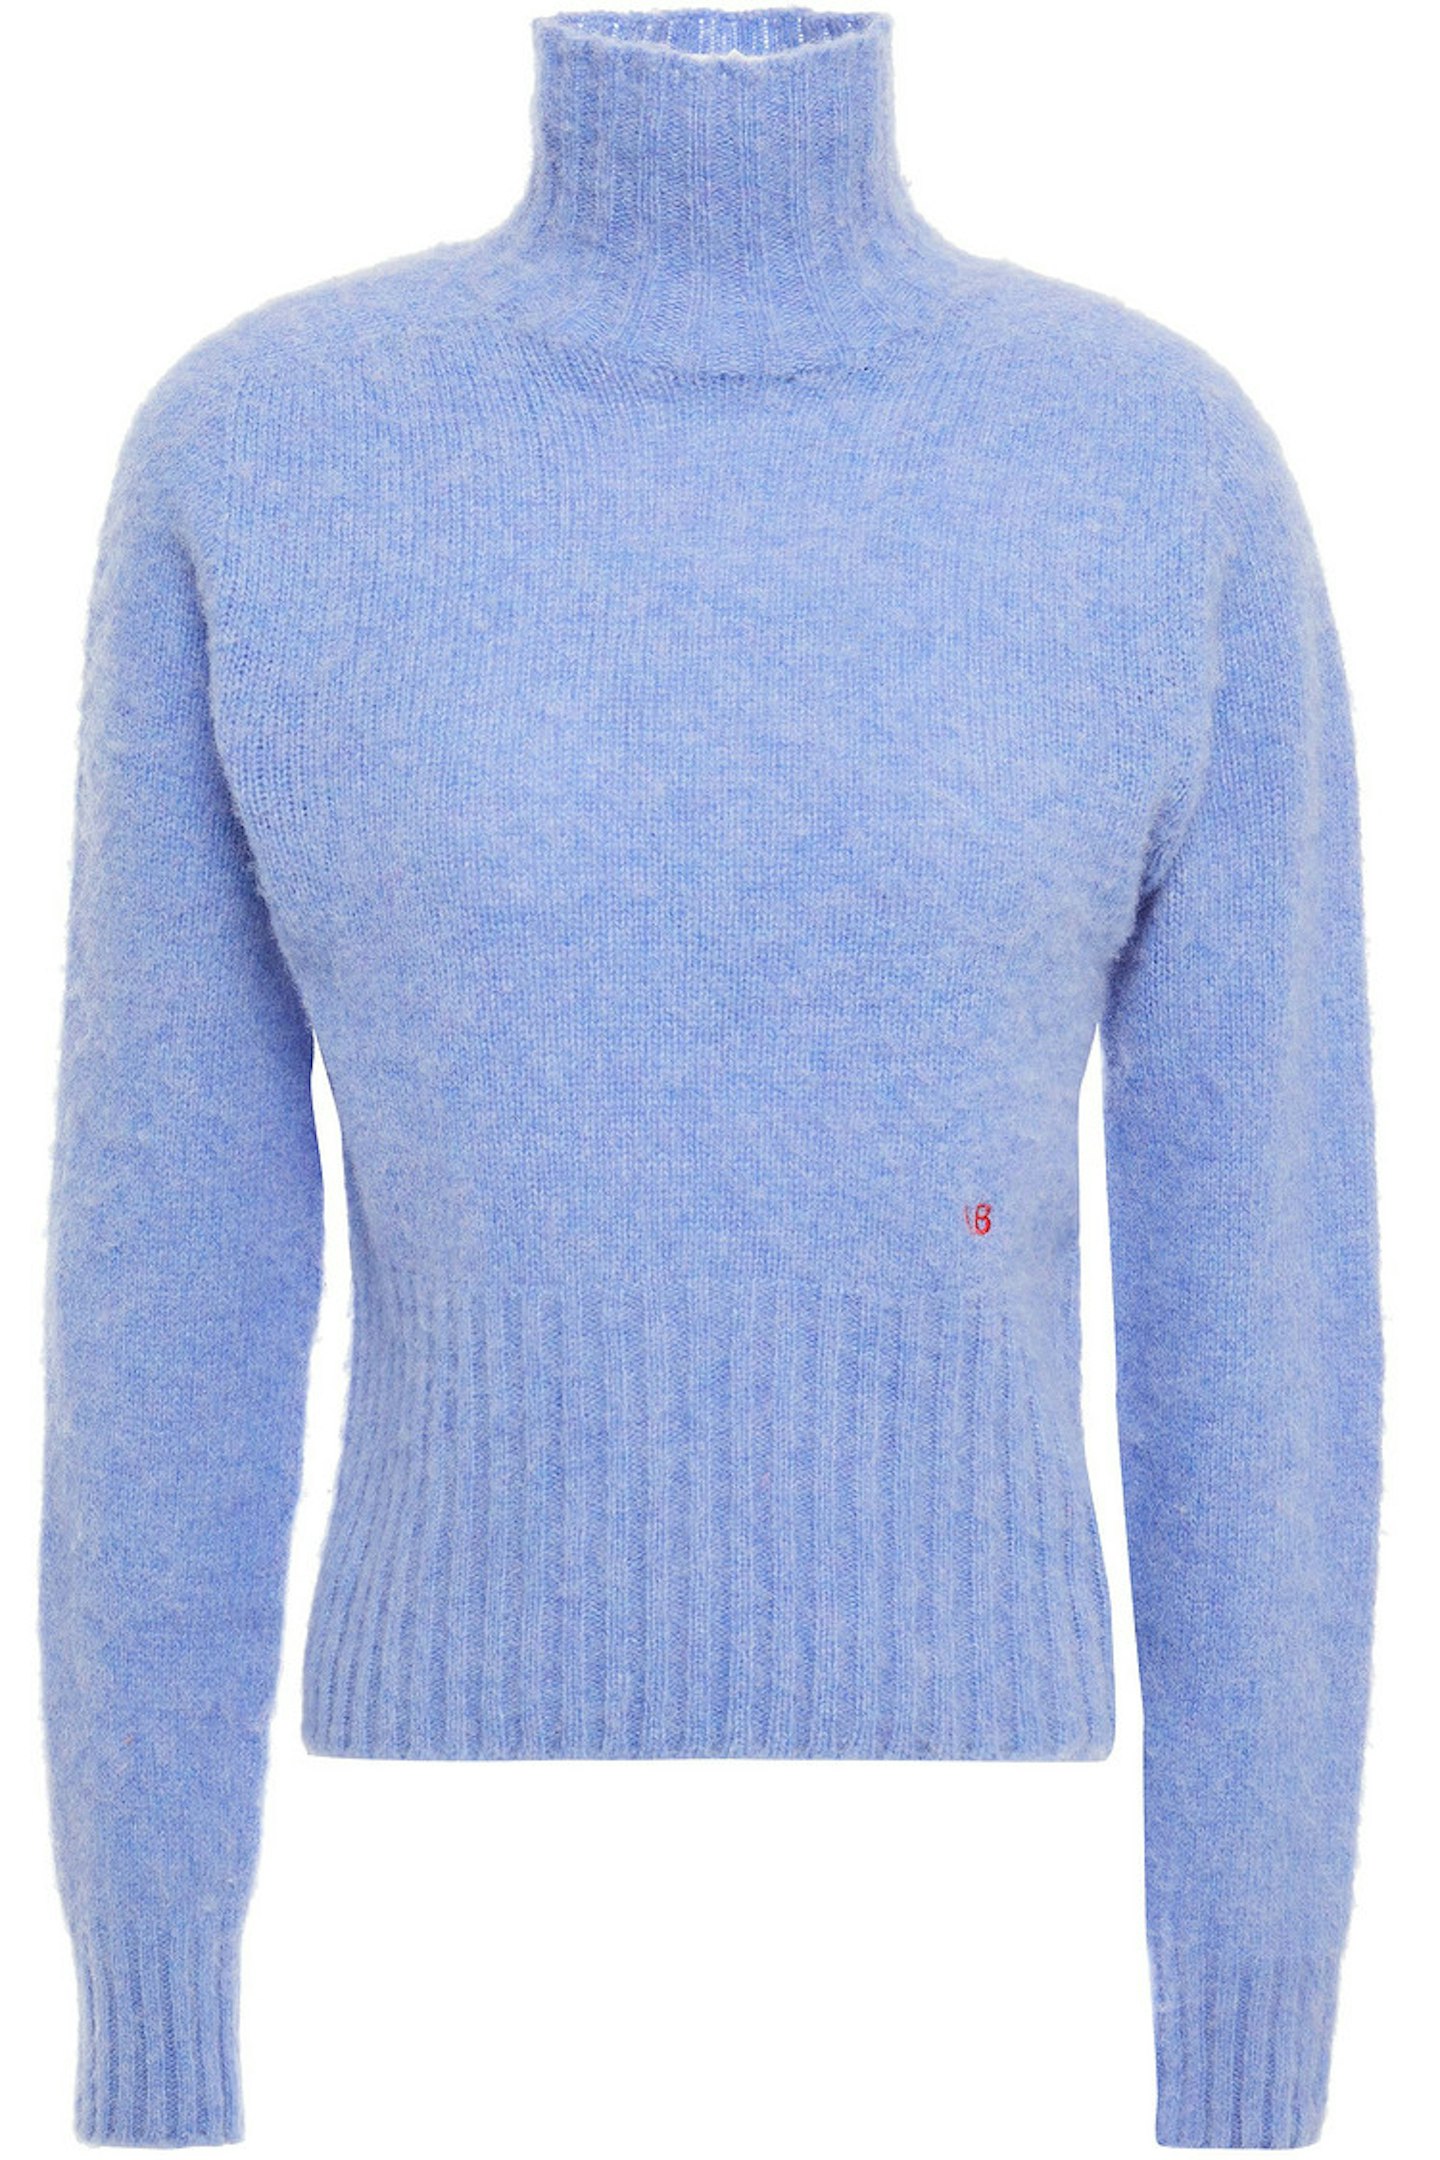 Victoria Beckham at The Outnet, Brushed-wool turtleneck sweater, £250